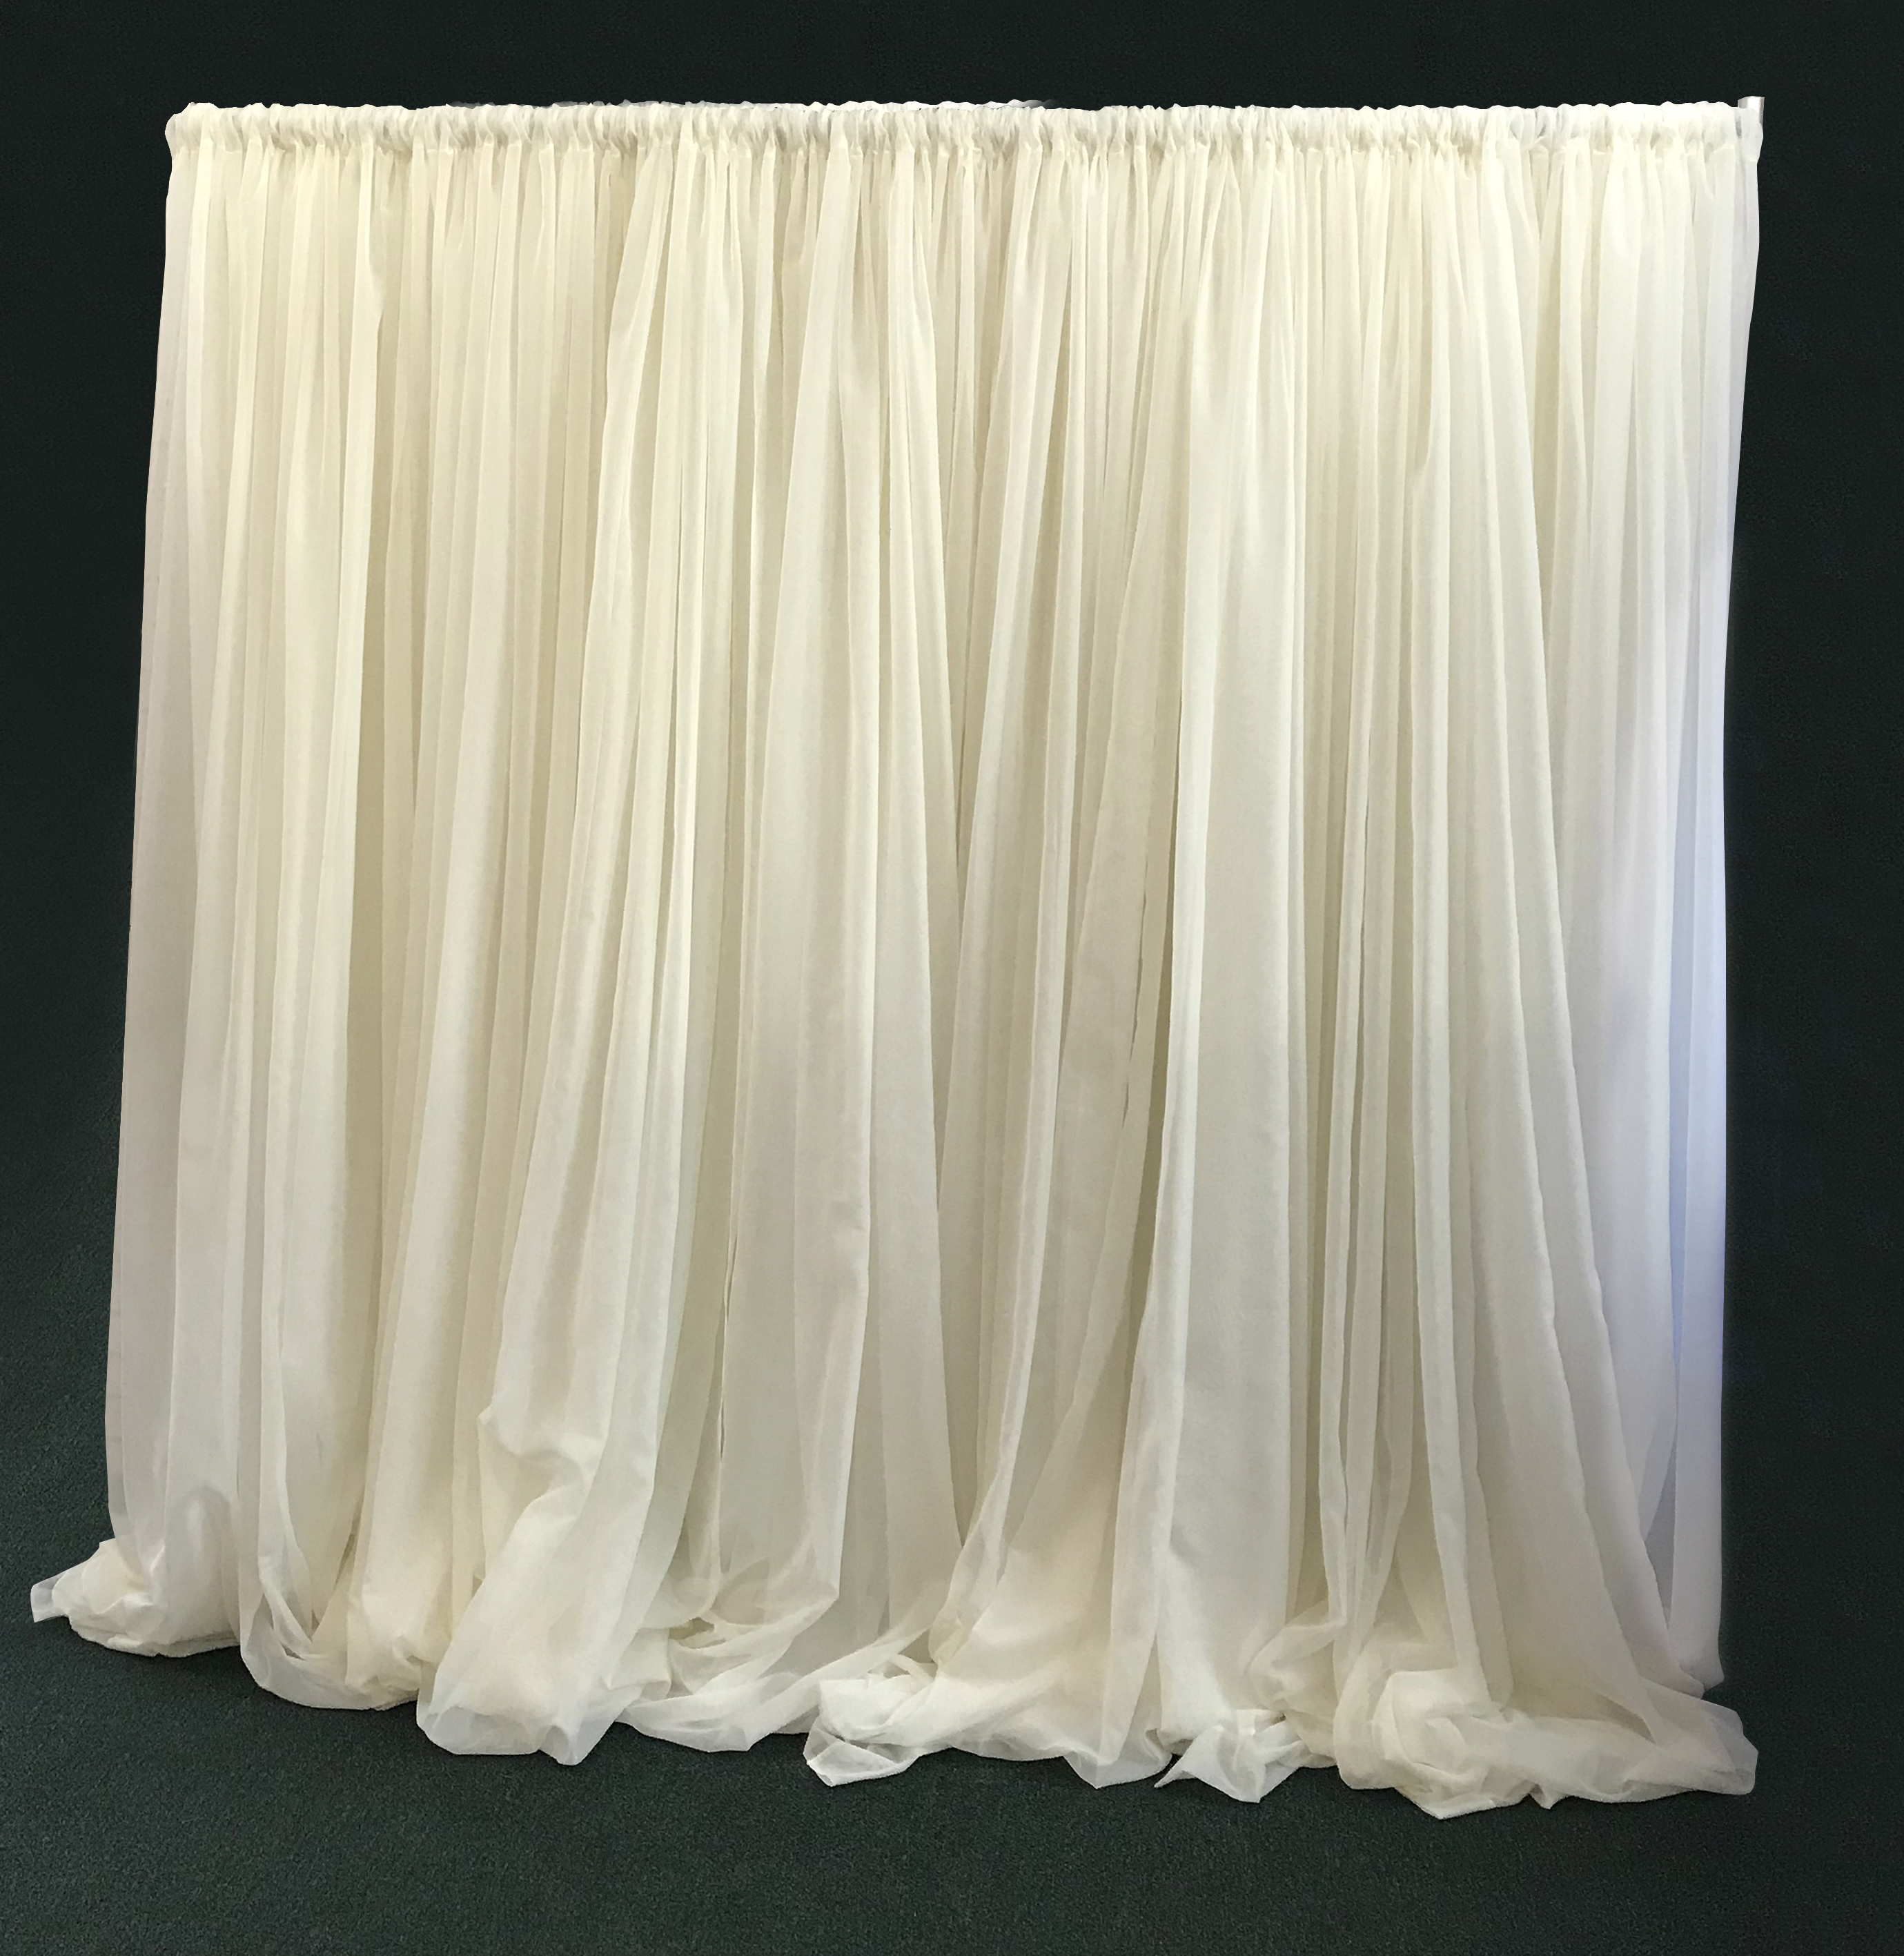 10' x 10 DIY Fabric Draping Backdrop Kit - All Occasions Party Rentals